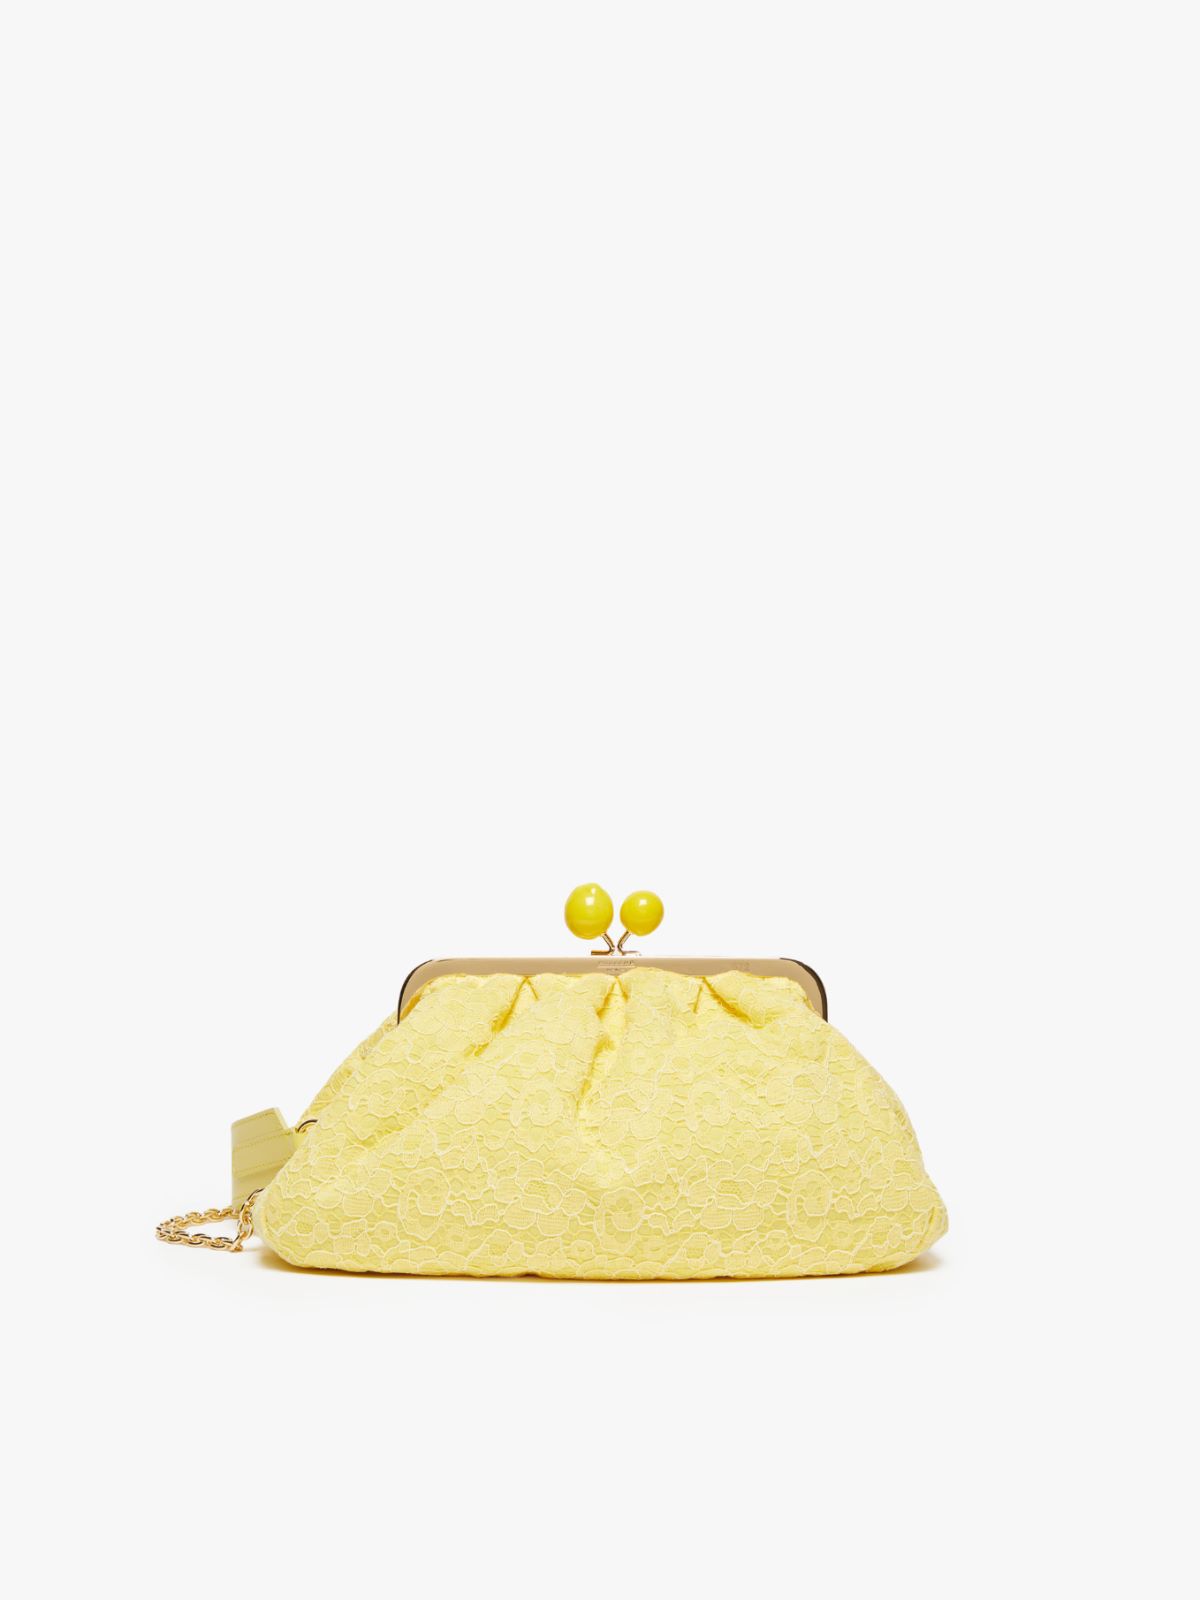 Hommage à la France Pasticcino Bag in lace - BRIGHT YELLOW - Weekend Max Mara